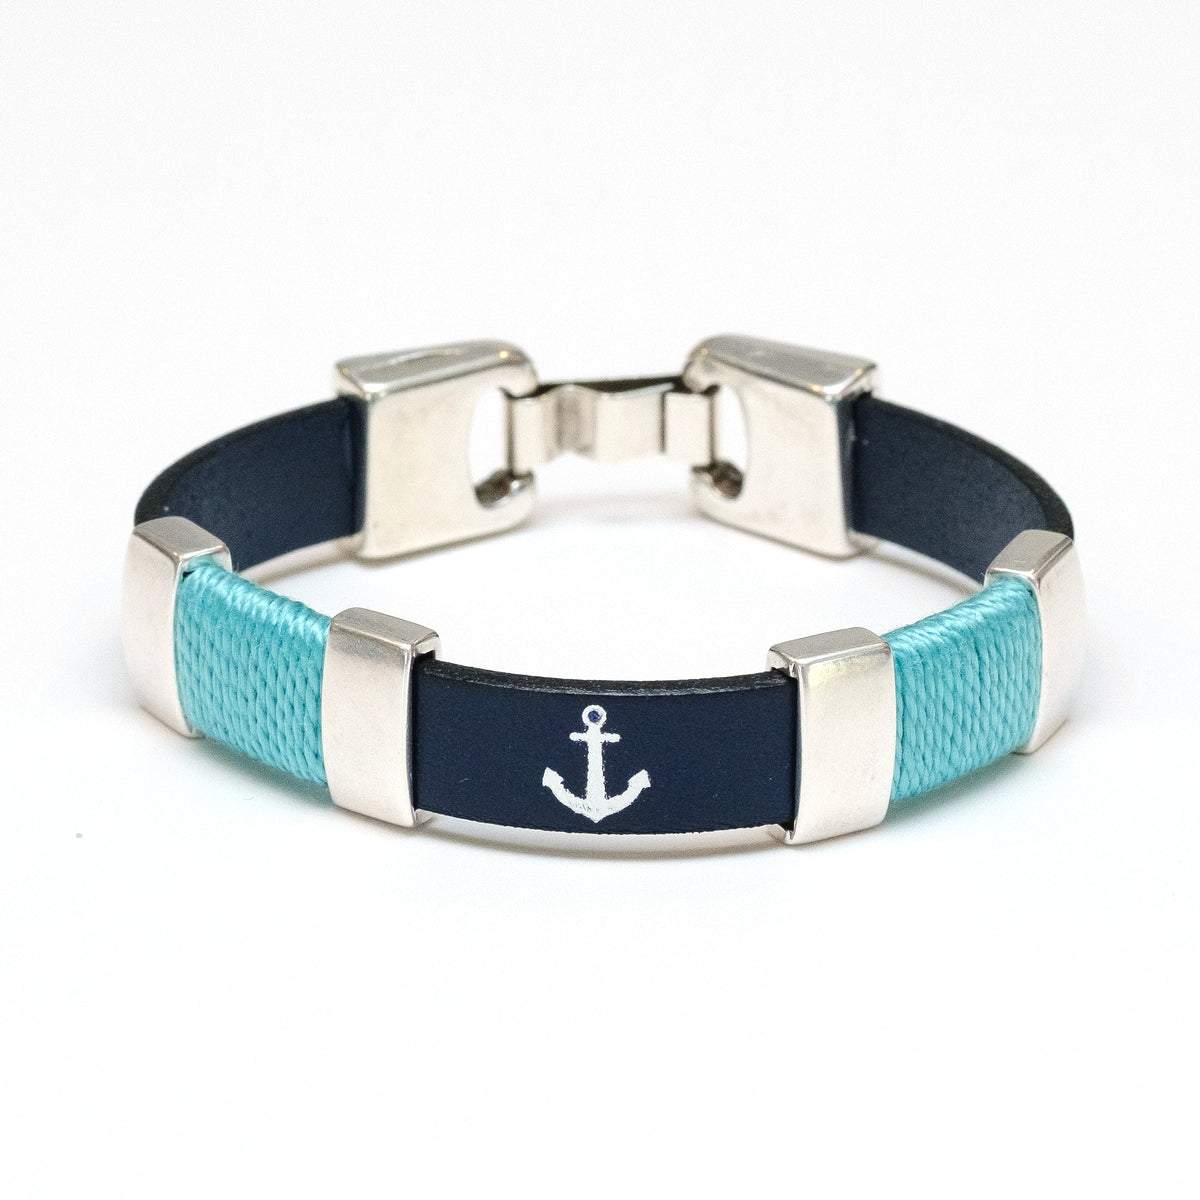 Chatham - Navy/Turquoise/Silver